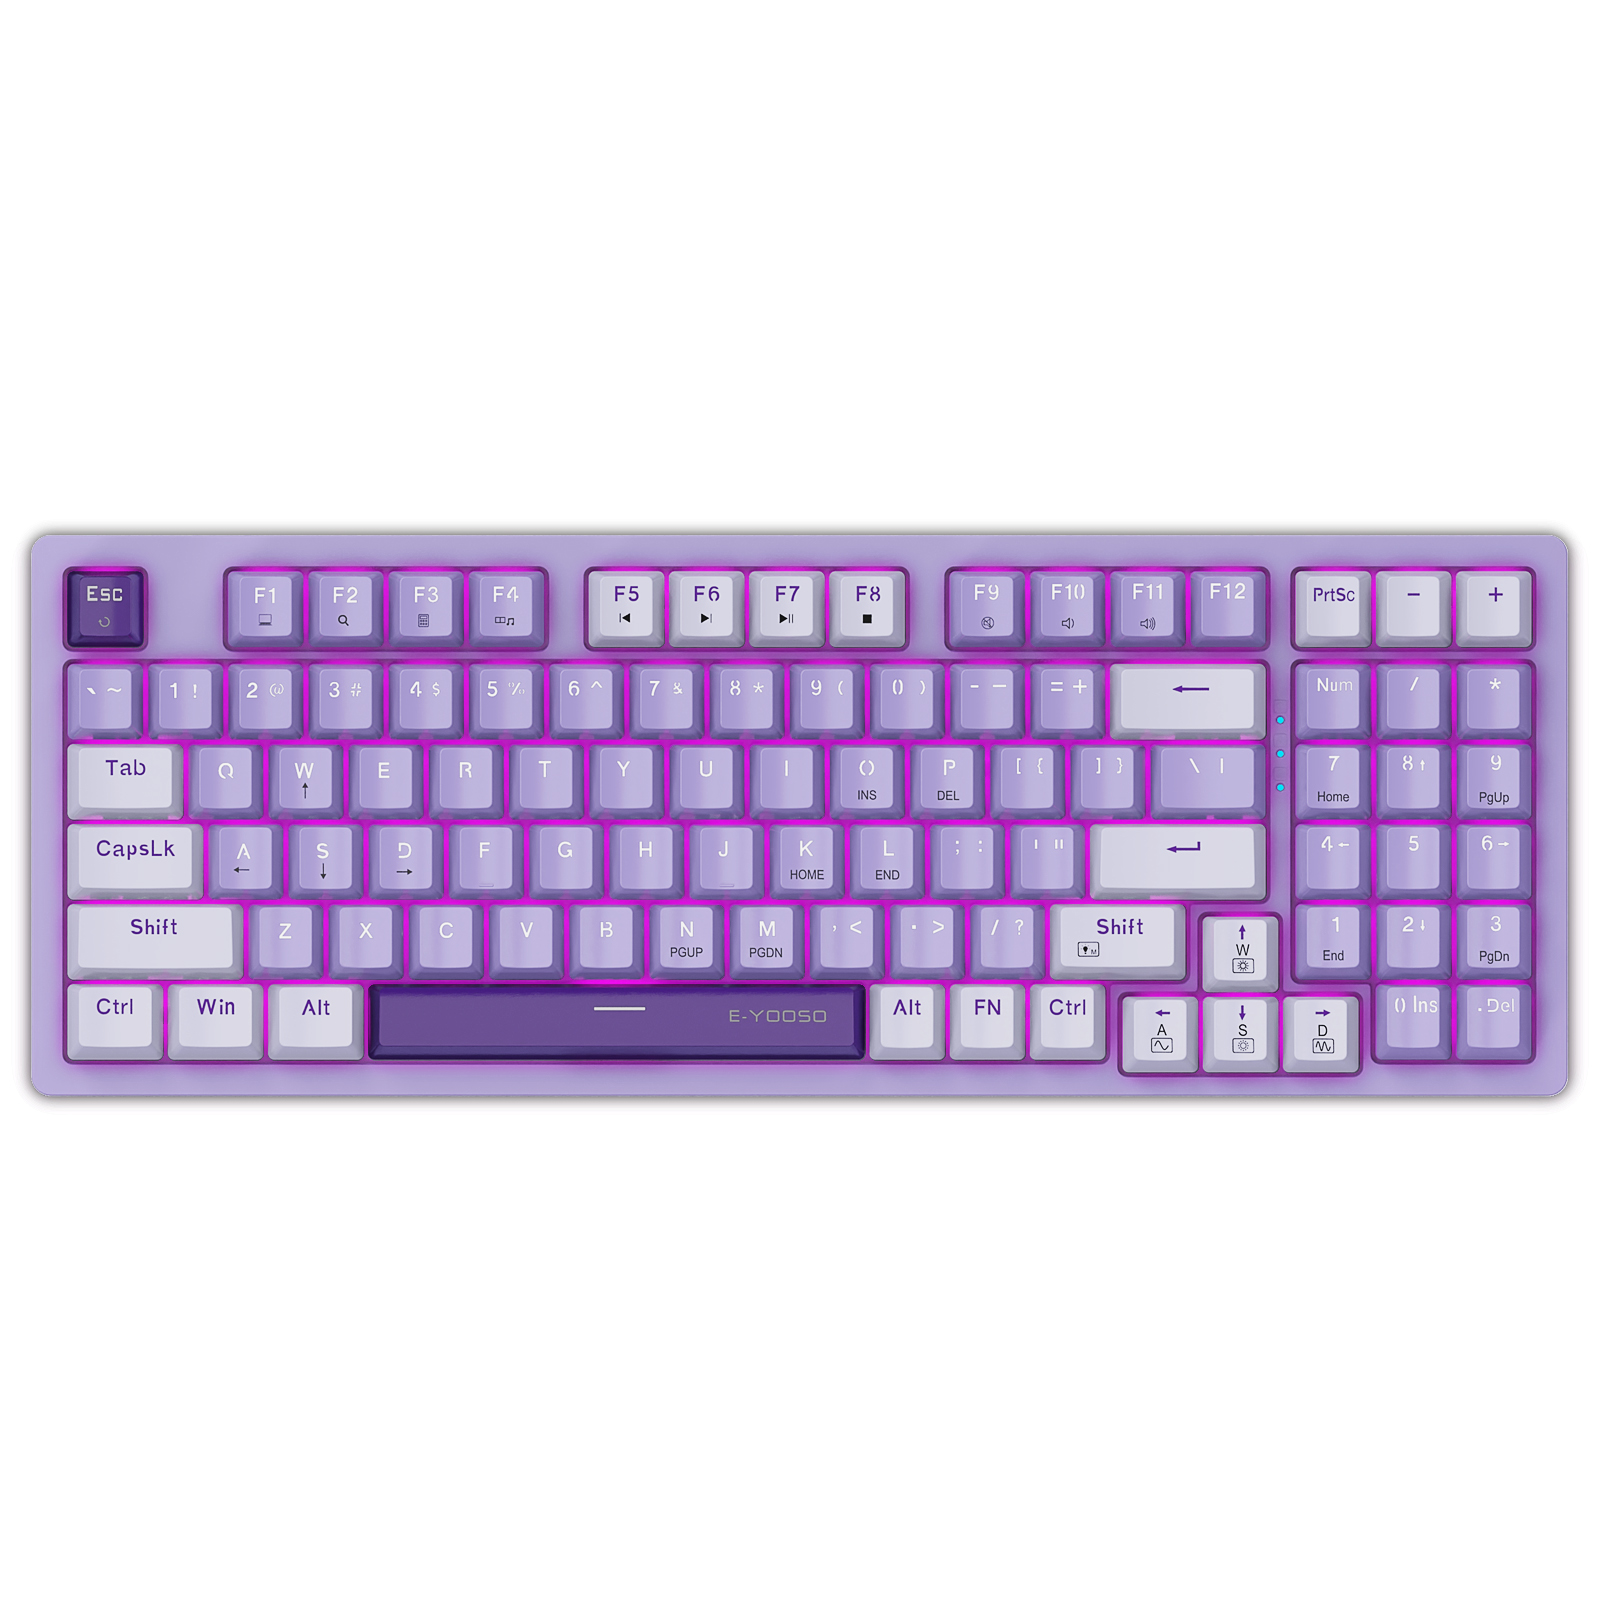 Z-94 Wired Compact 94 Keys RGB Backlit Gaming Keyboard for PC/Computer